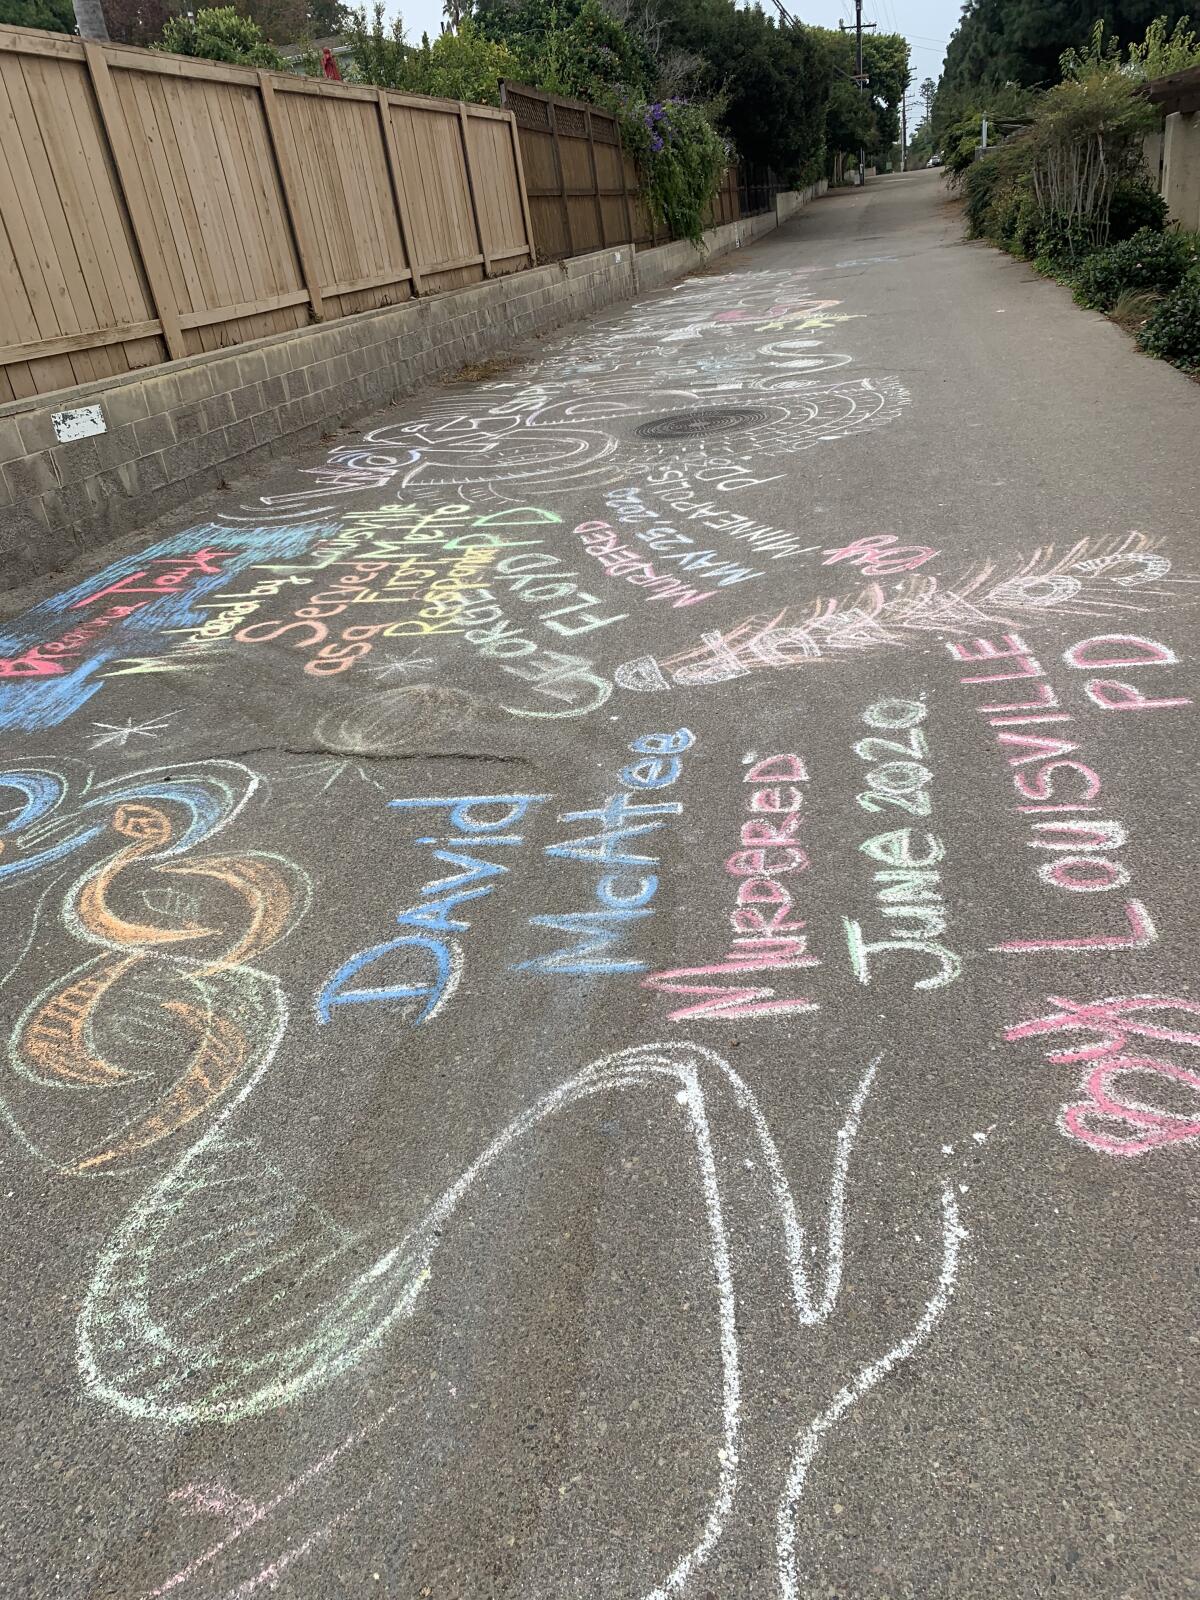 A small group drew messages and images in chalk on the La Jolla Bike Path on Sept. 25.